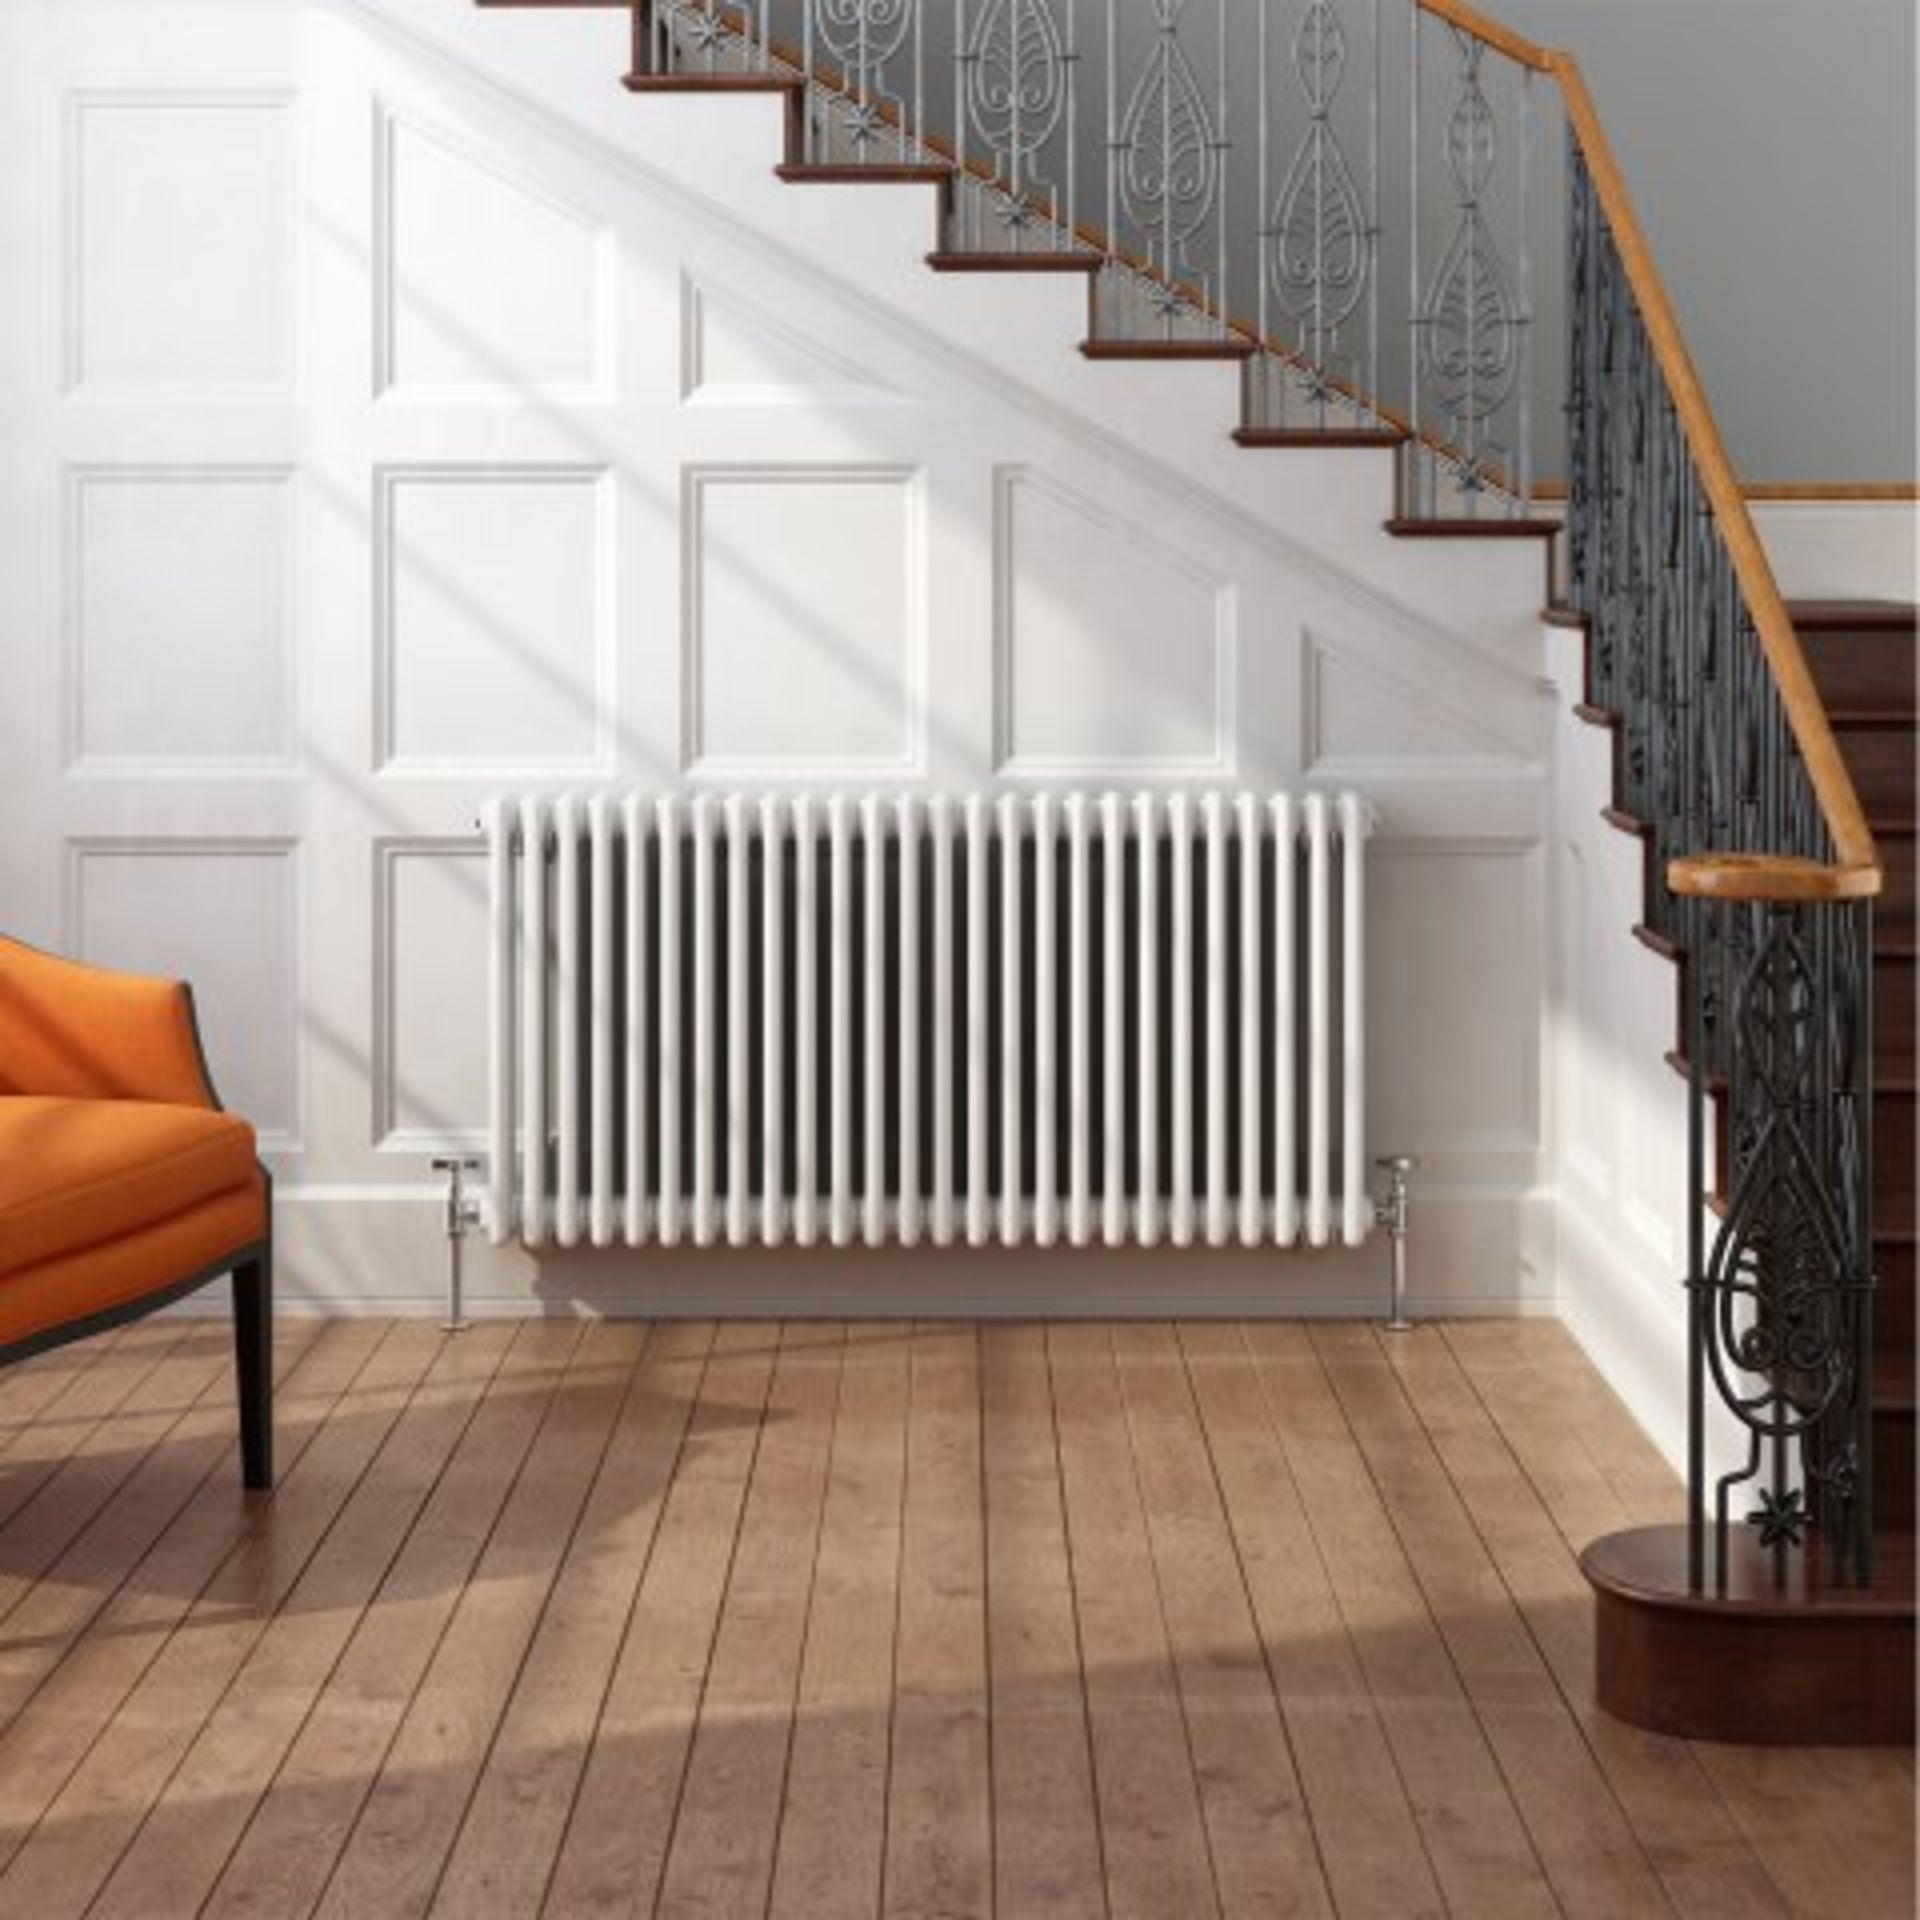 (J20) 600x1188mm White Double Panel Horizontal Colosseum Traditional Radiator. RRP £515.99. For an - Image 2 of 3